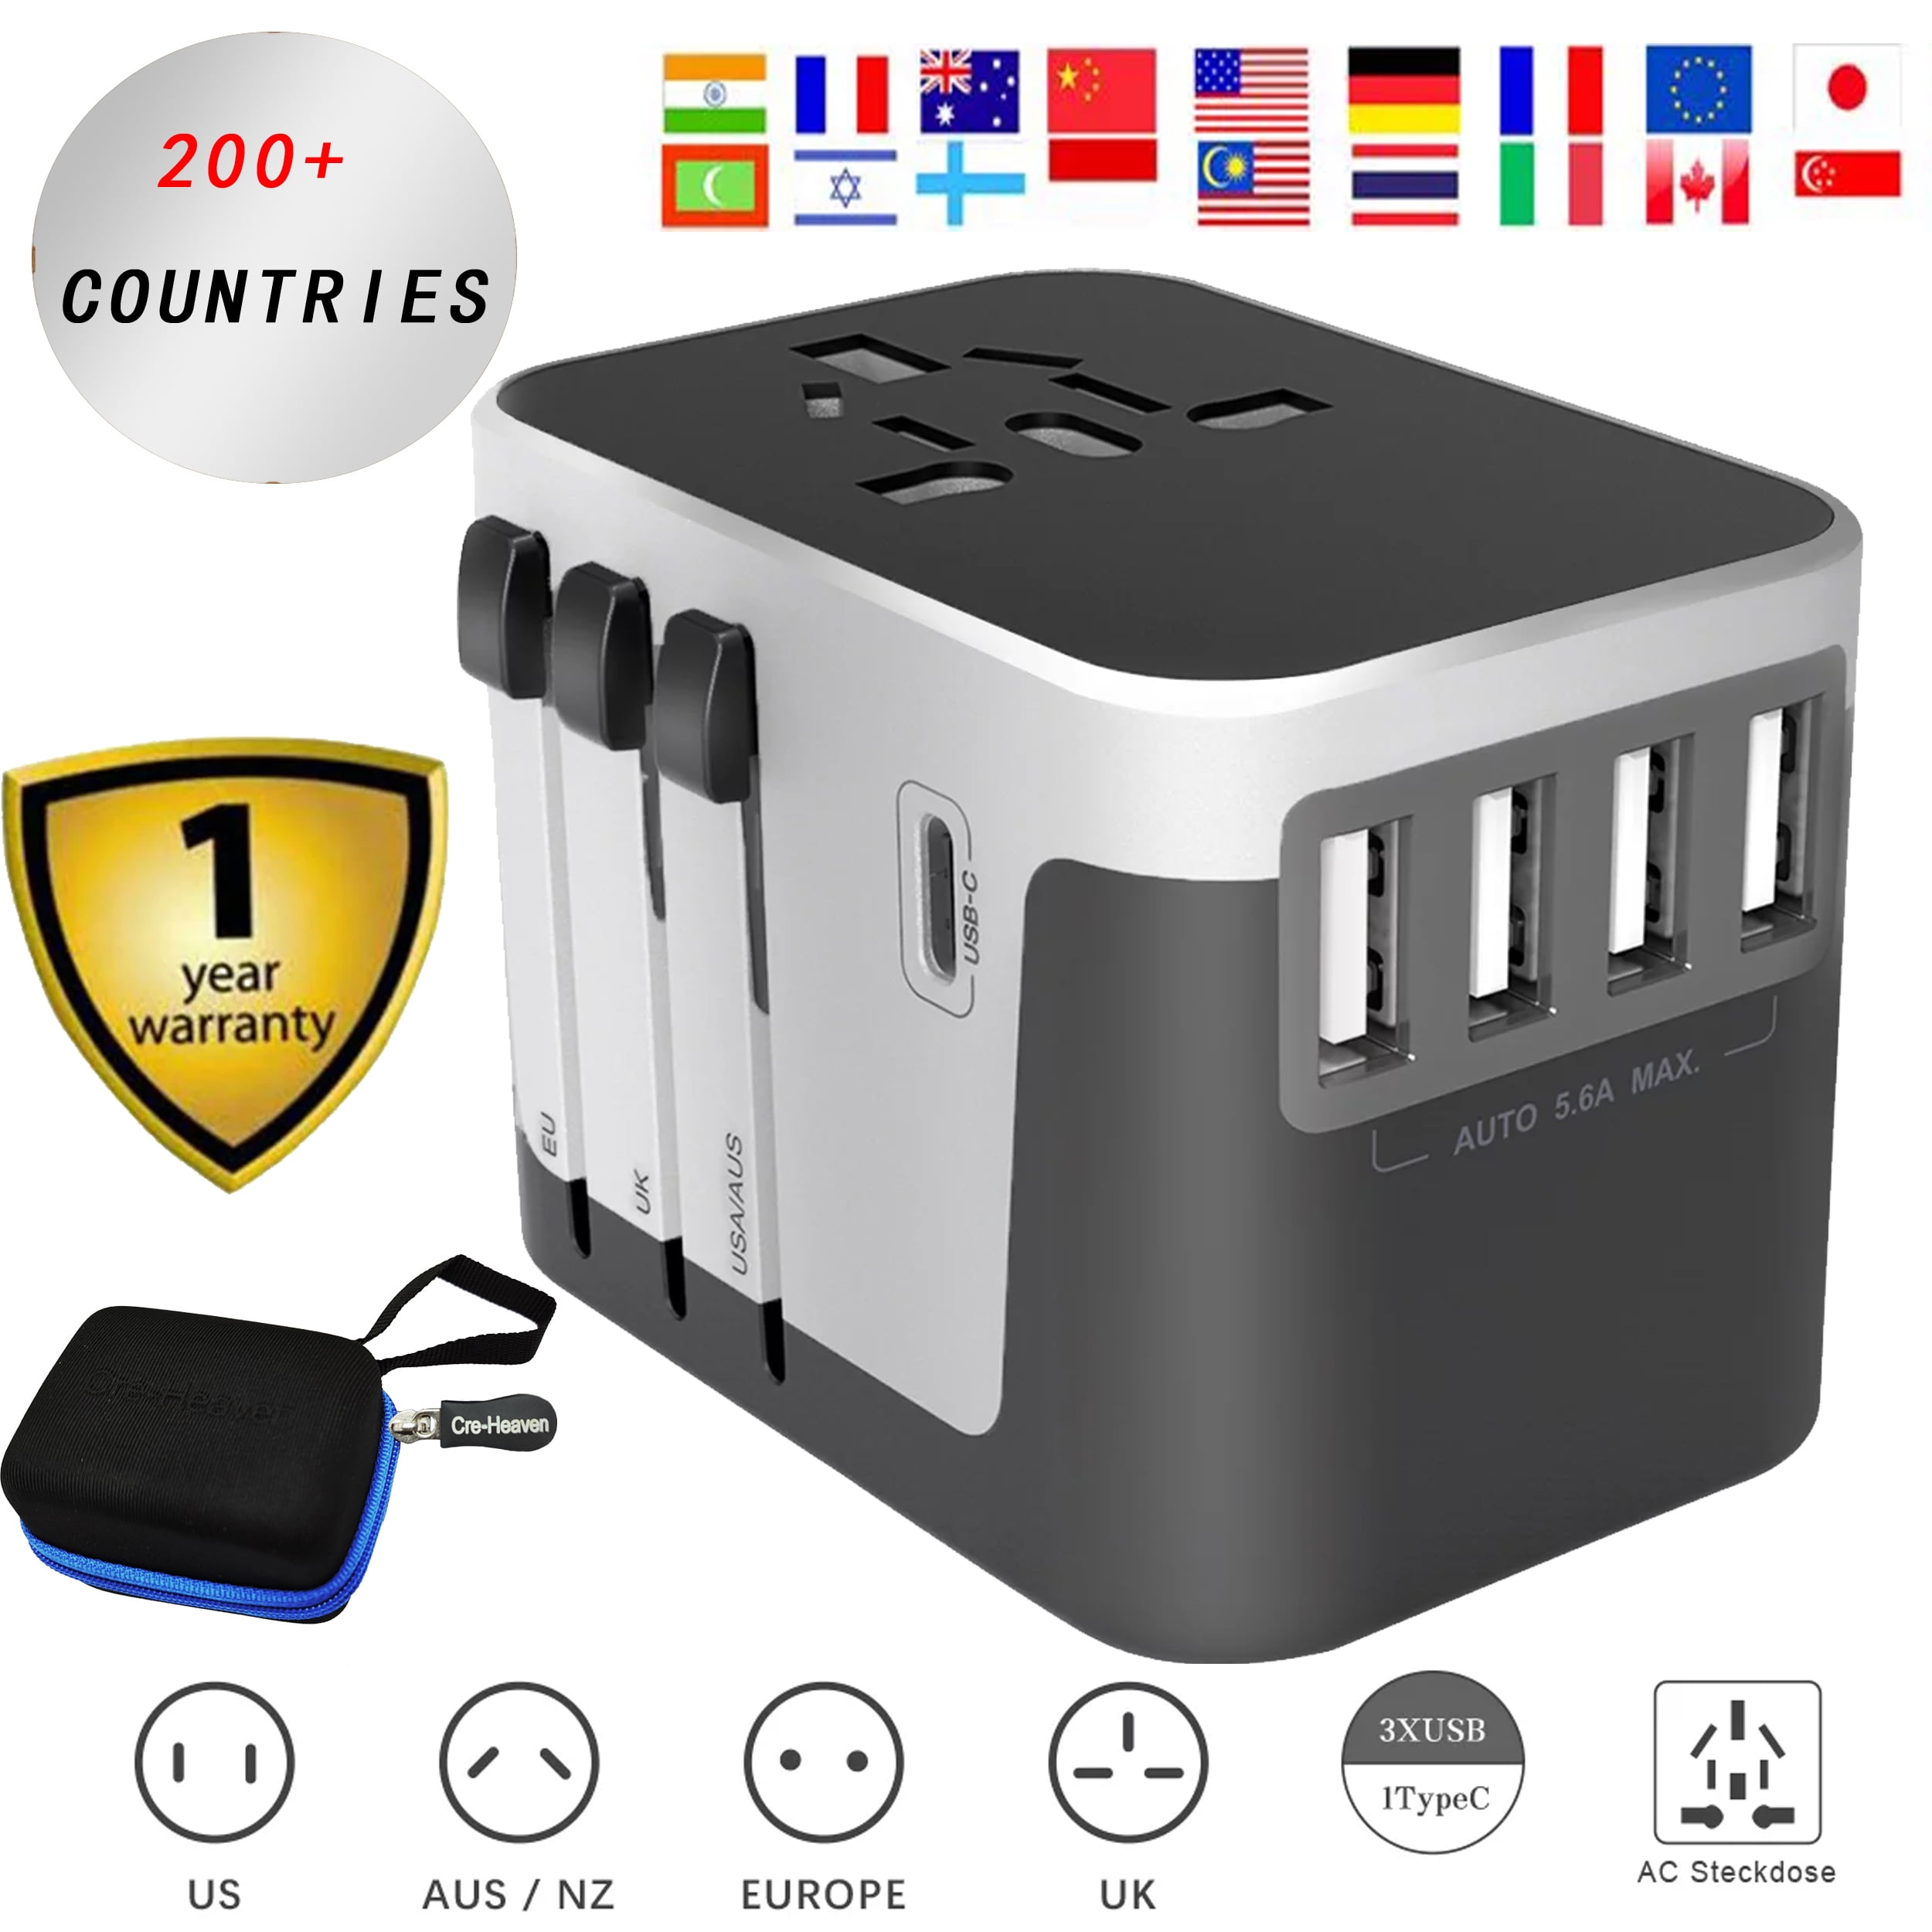 Cre-Heaven All-in-one Universal Travel Adapter Worldwide 220v to 110v  Converter,Power Adapter Travel Charger International Plug Adapter 4 USB  Ports,for Europe UK AUS Asia Japan Covers 200+Countries 